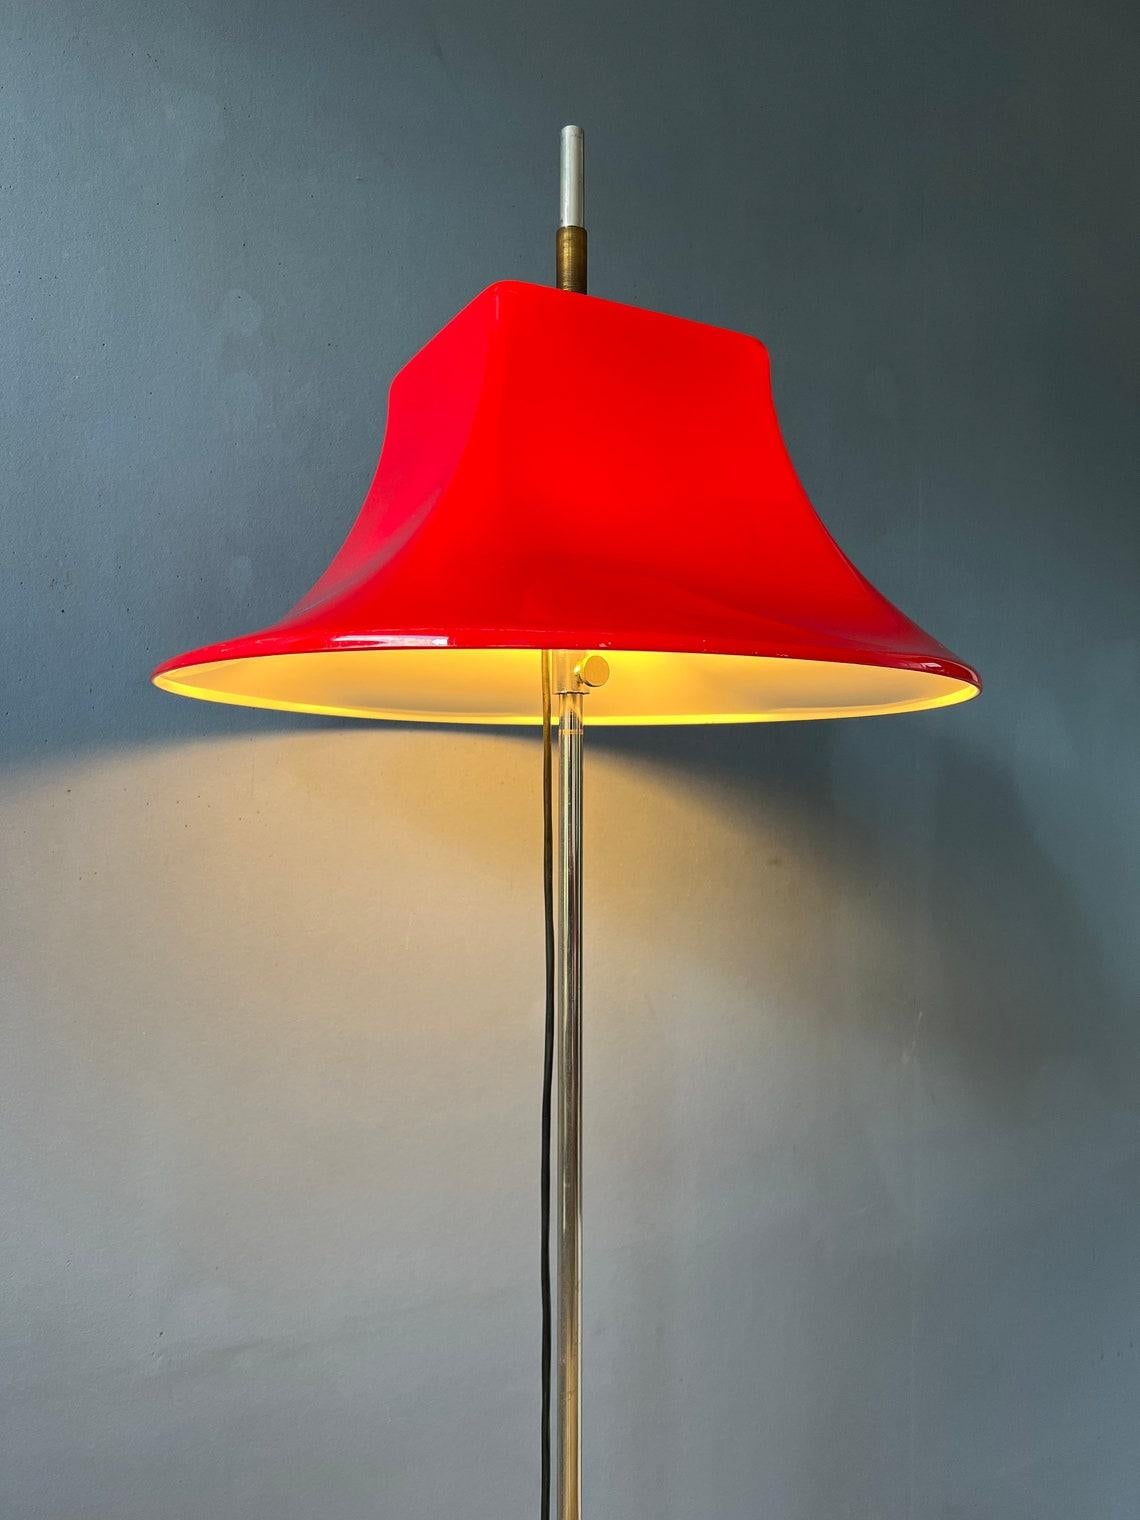 Very rare red space age floor lamp by Willem Hagoort with thick acrylic glass shade. The shade can be moved up and down the (heavy) base. The lamp requires two E27 lightbulbs and currently has an EU-plug (works outside EU with